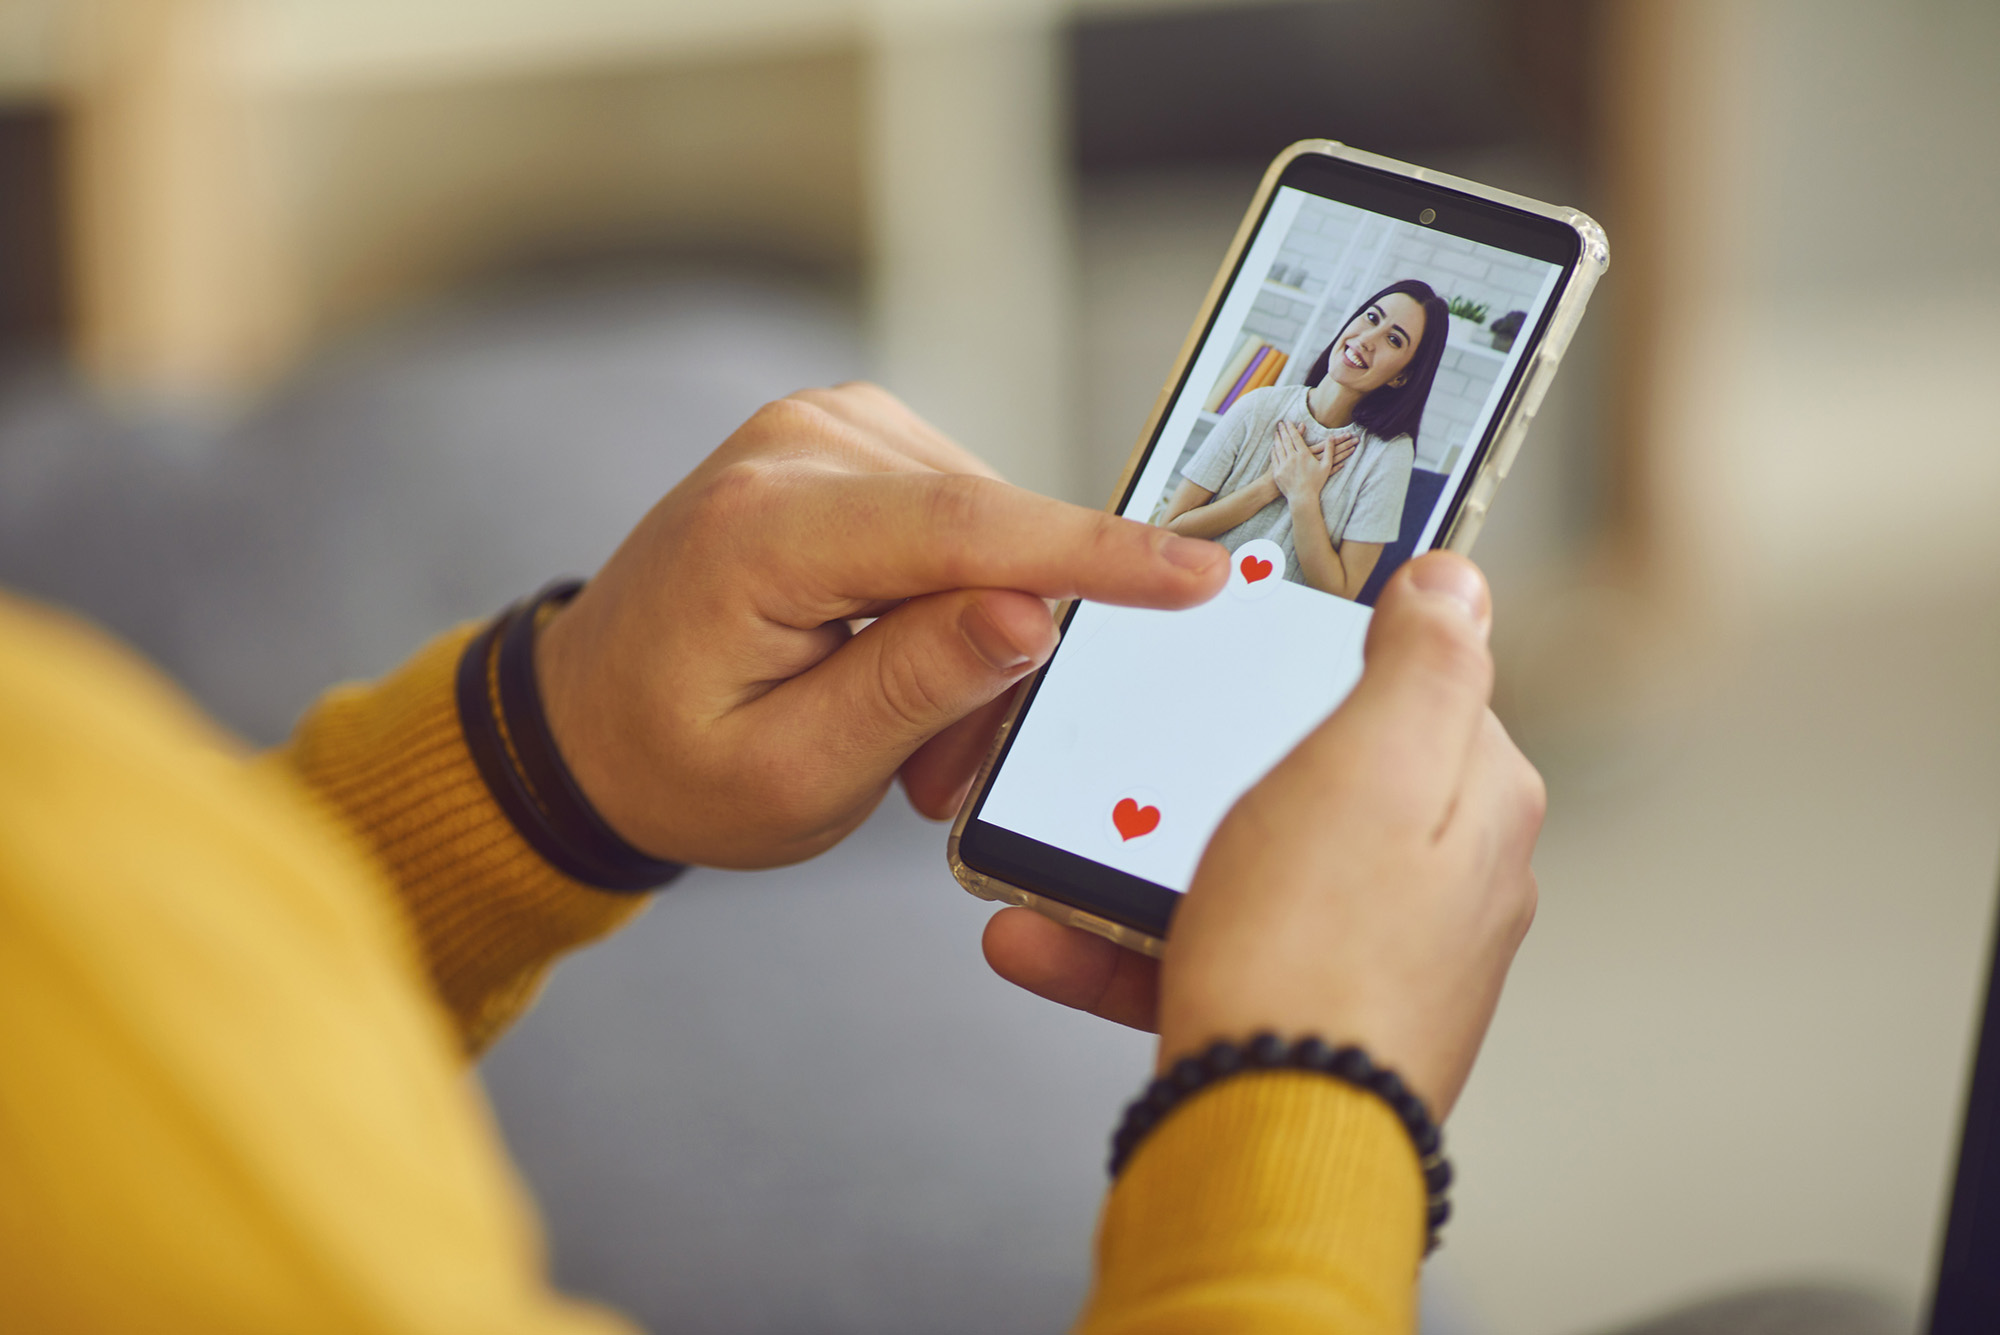 Photo: A stock image of a person swiping on a dating app on social media.